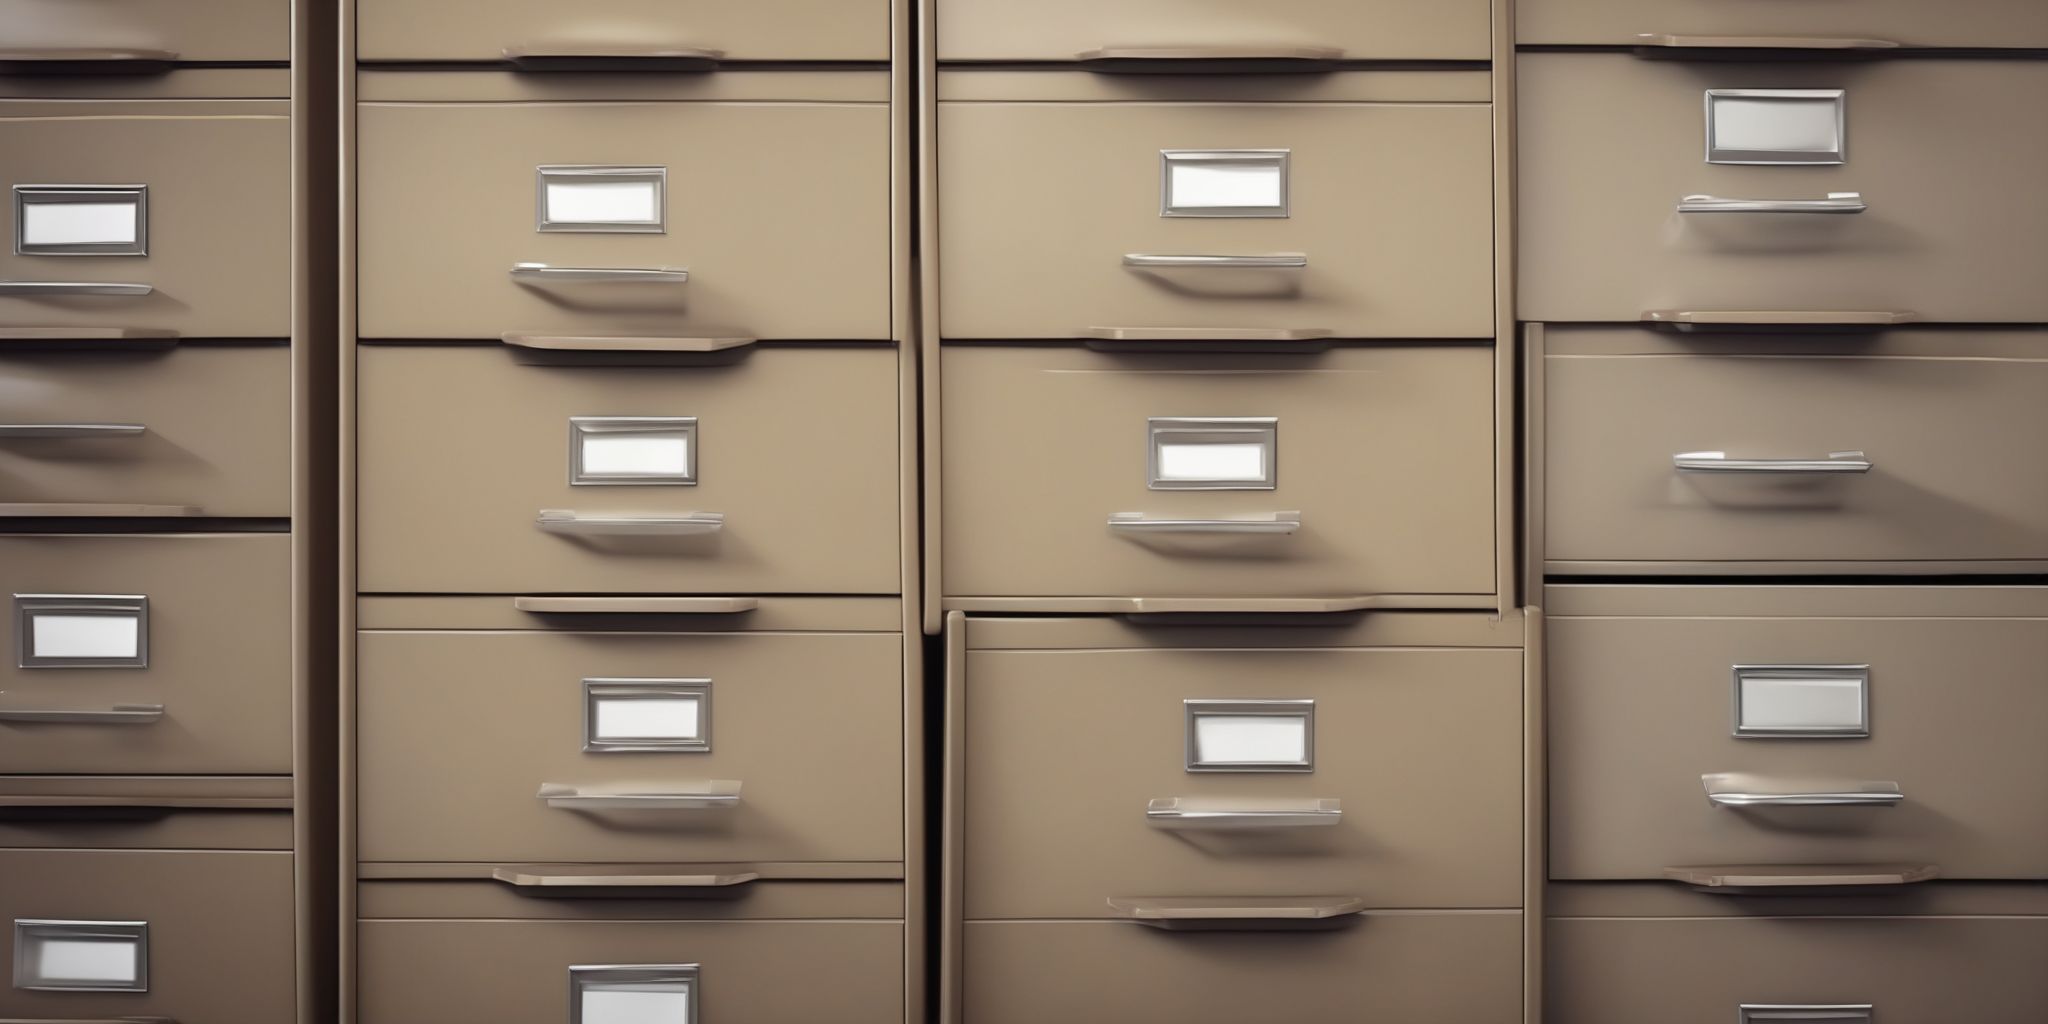 File cabinet  in realistic, photographic style